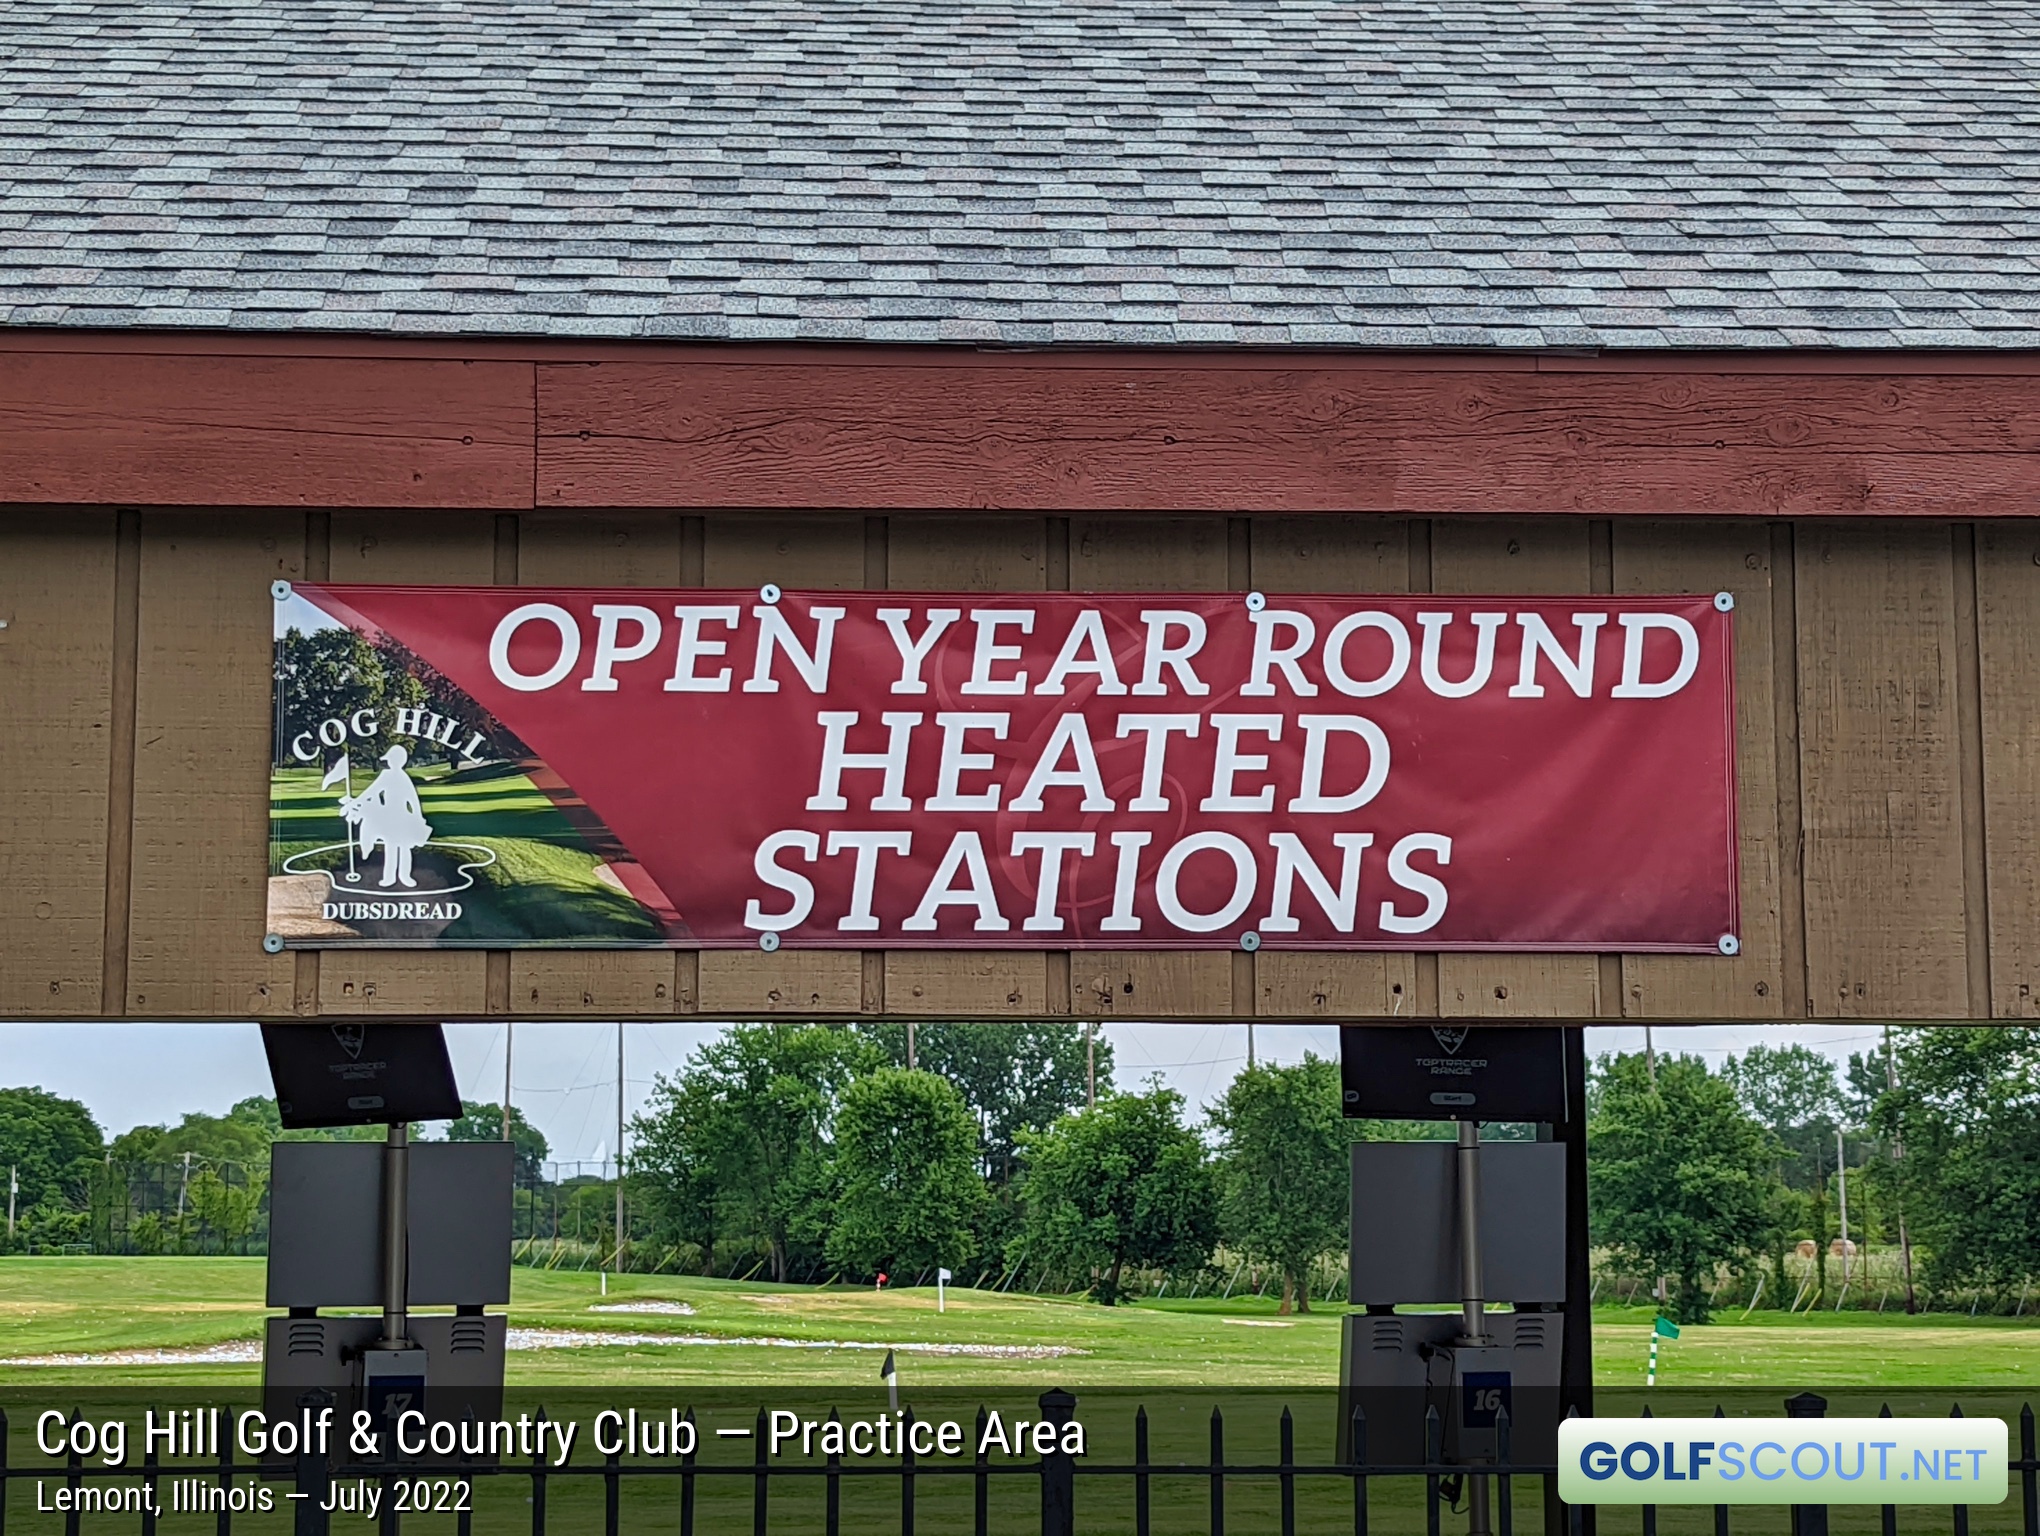 Photo of the practice area at Cog Hill Course #4 - Dubsdread in Lemont, Illinois. The range is open all year round, with a heating system for the winter.